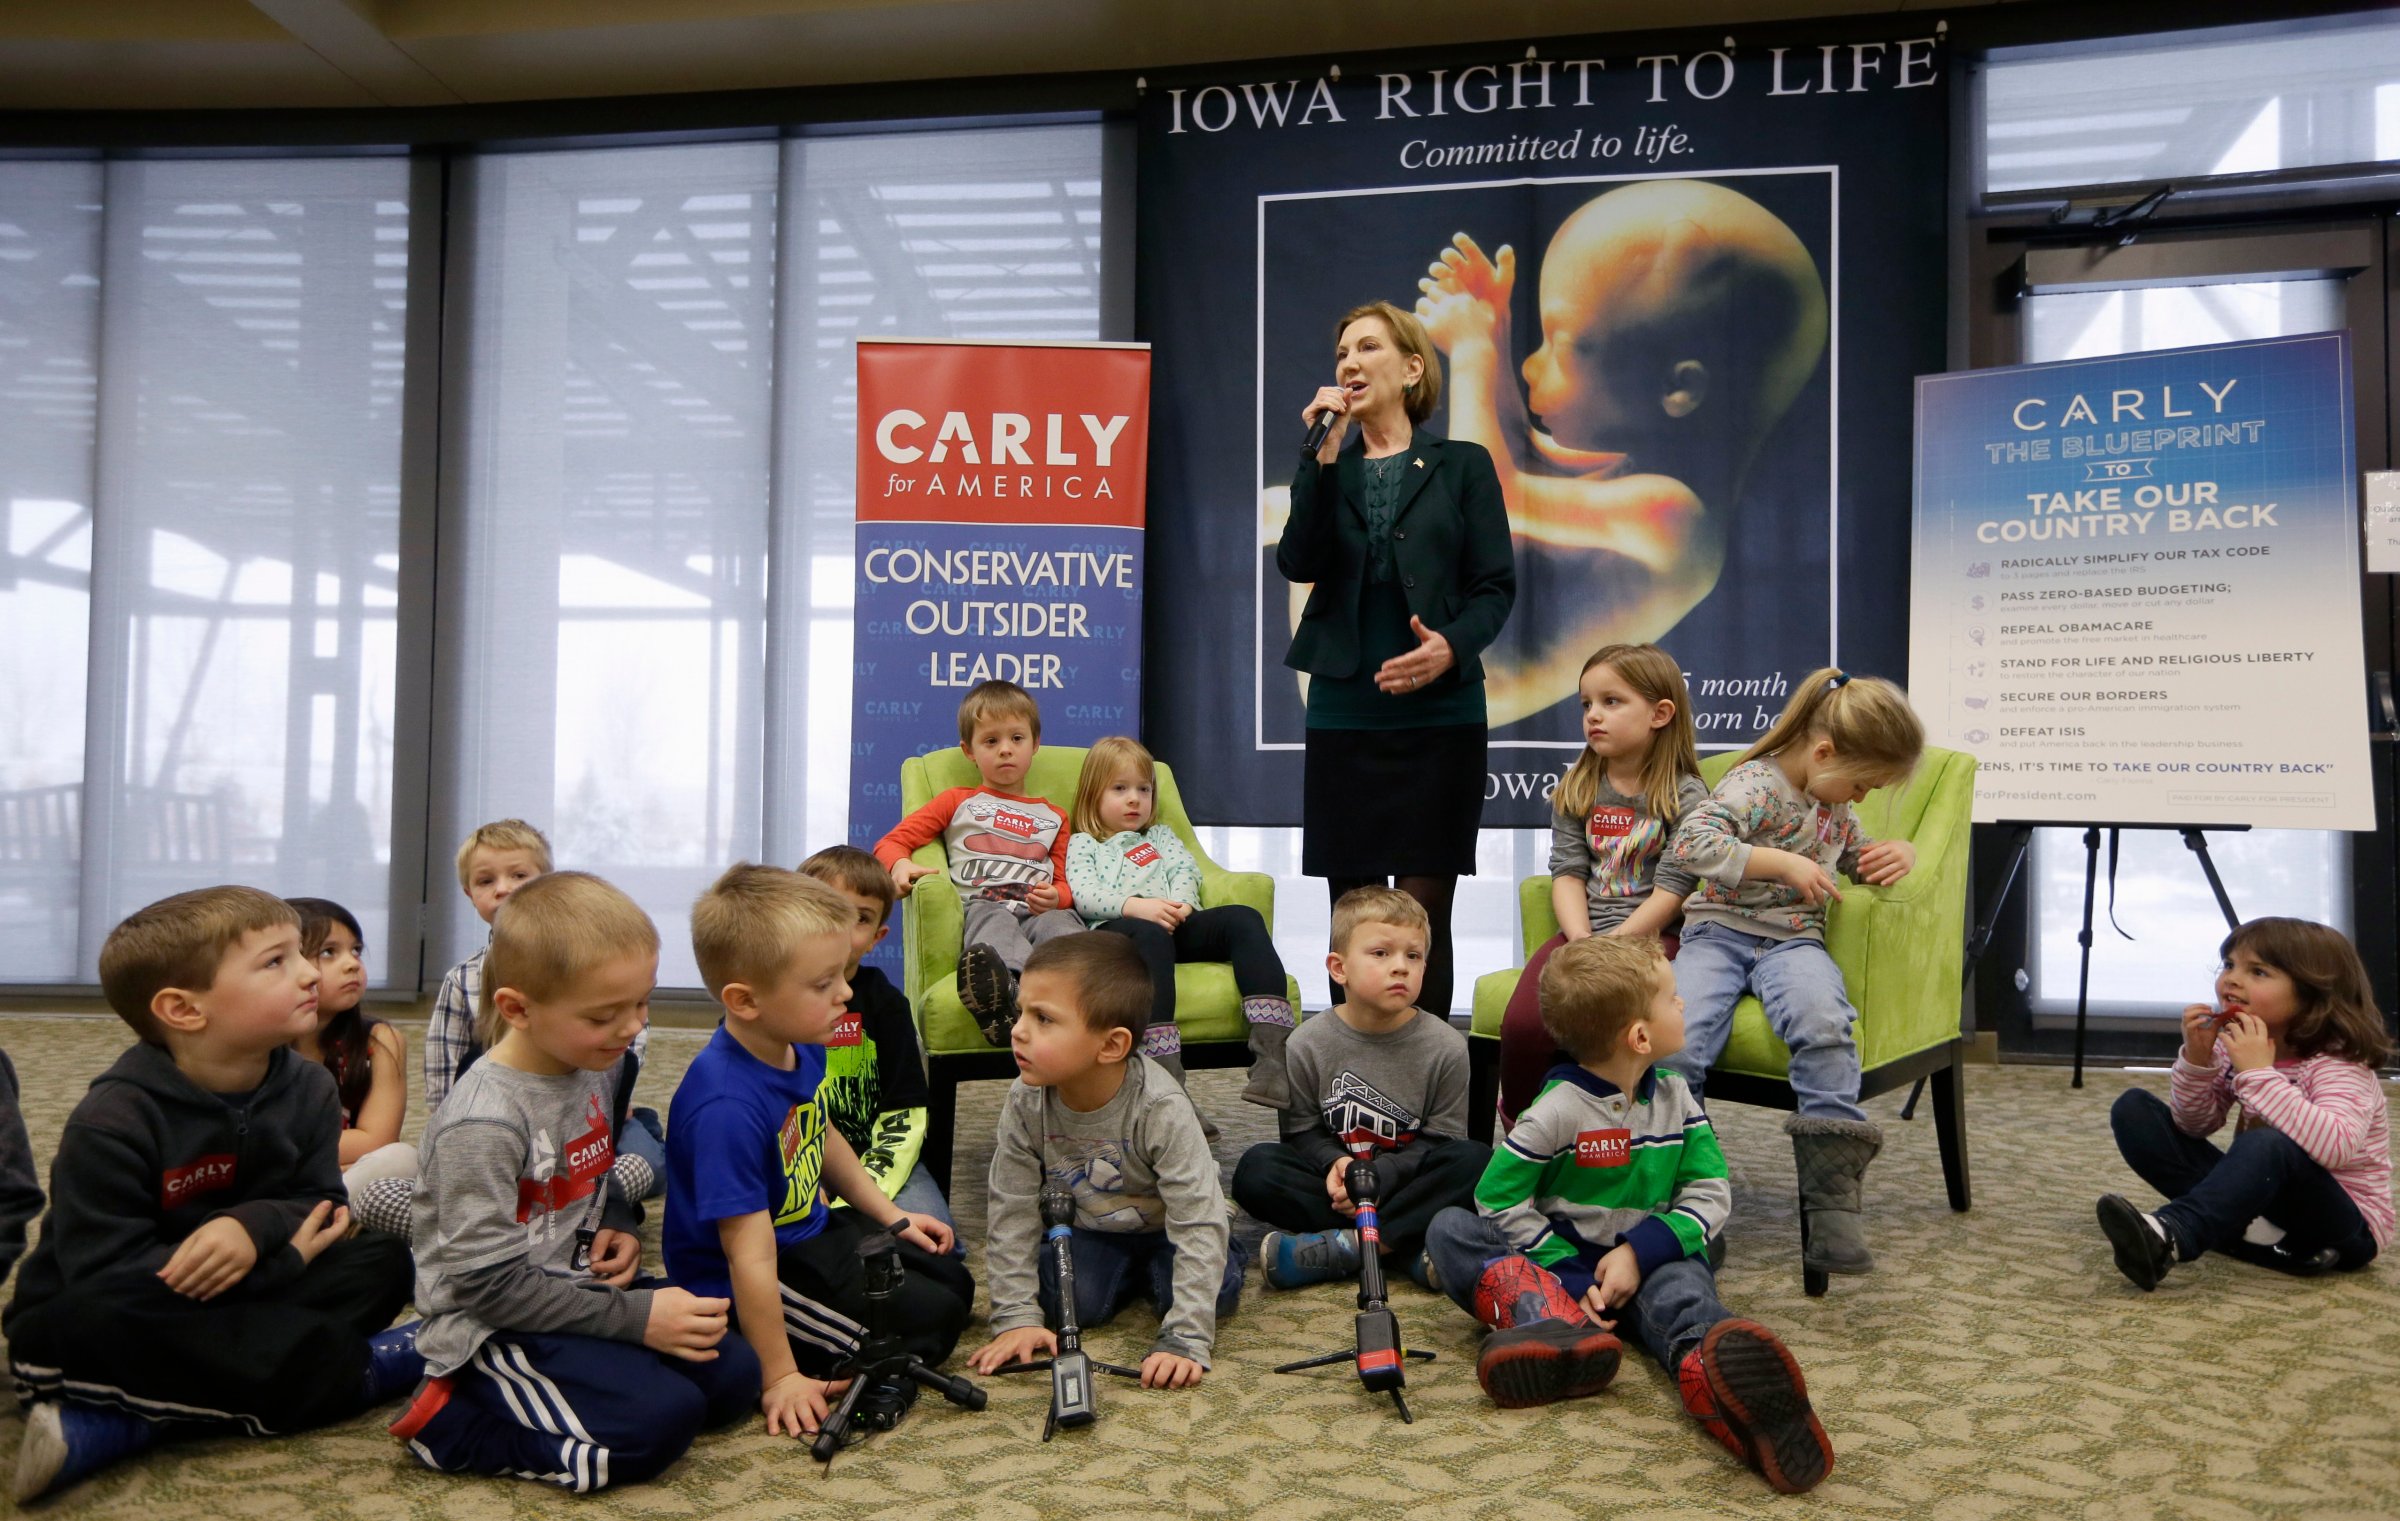 Republican presidential candidate Carly Fiorina is surrounded by preschool students as she speaks during the Iowa Right to Life Presidential Forum in Des Moines, Iowa on Jan. 20, 2016.